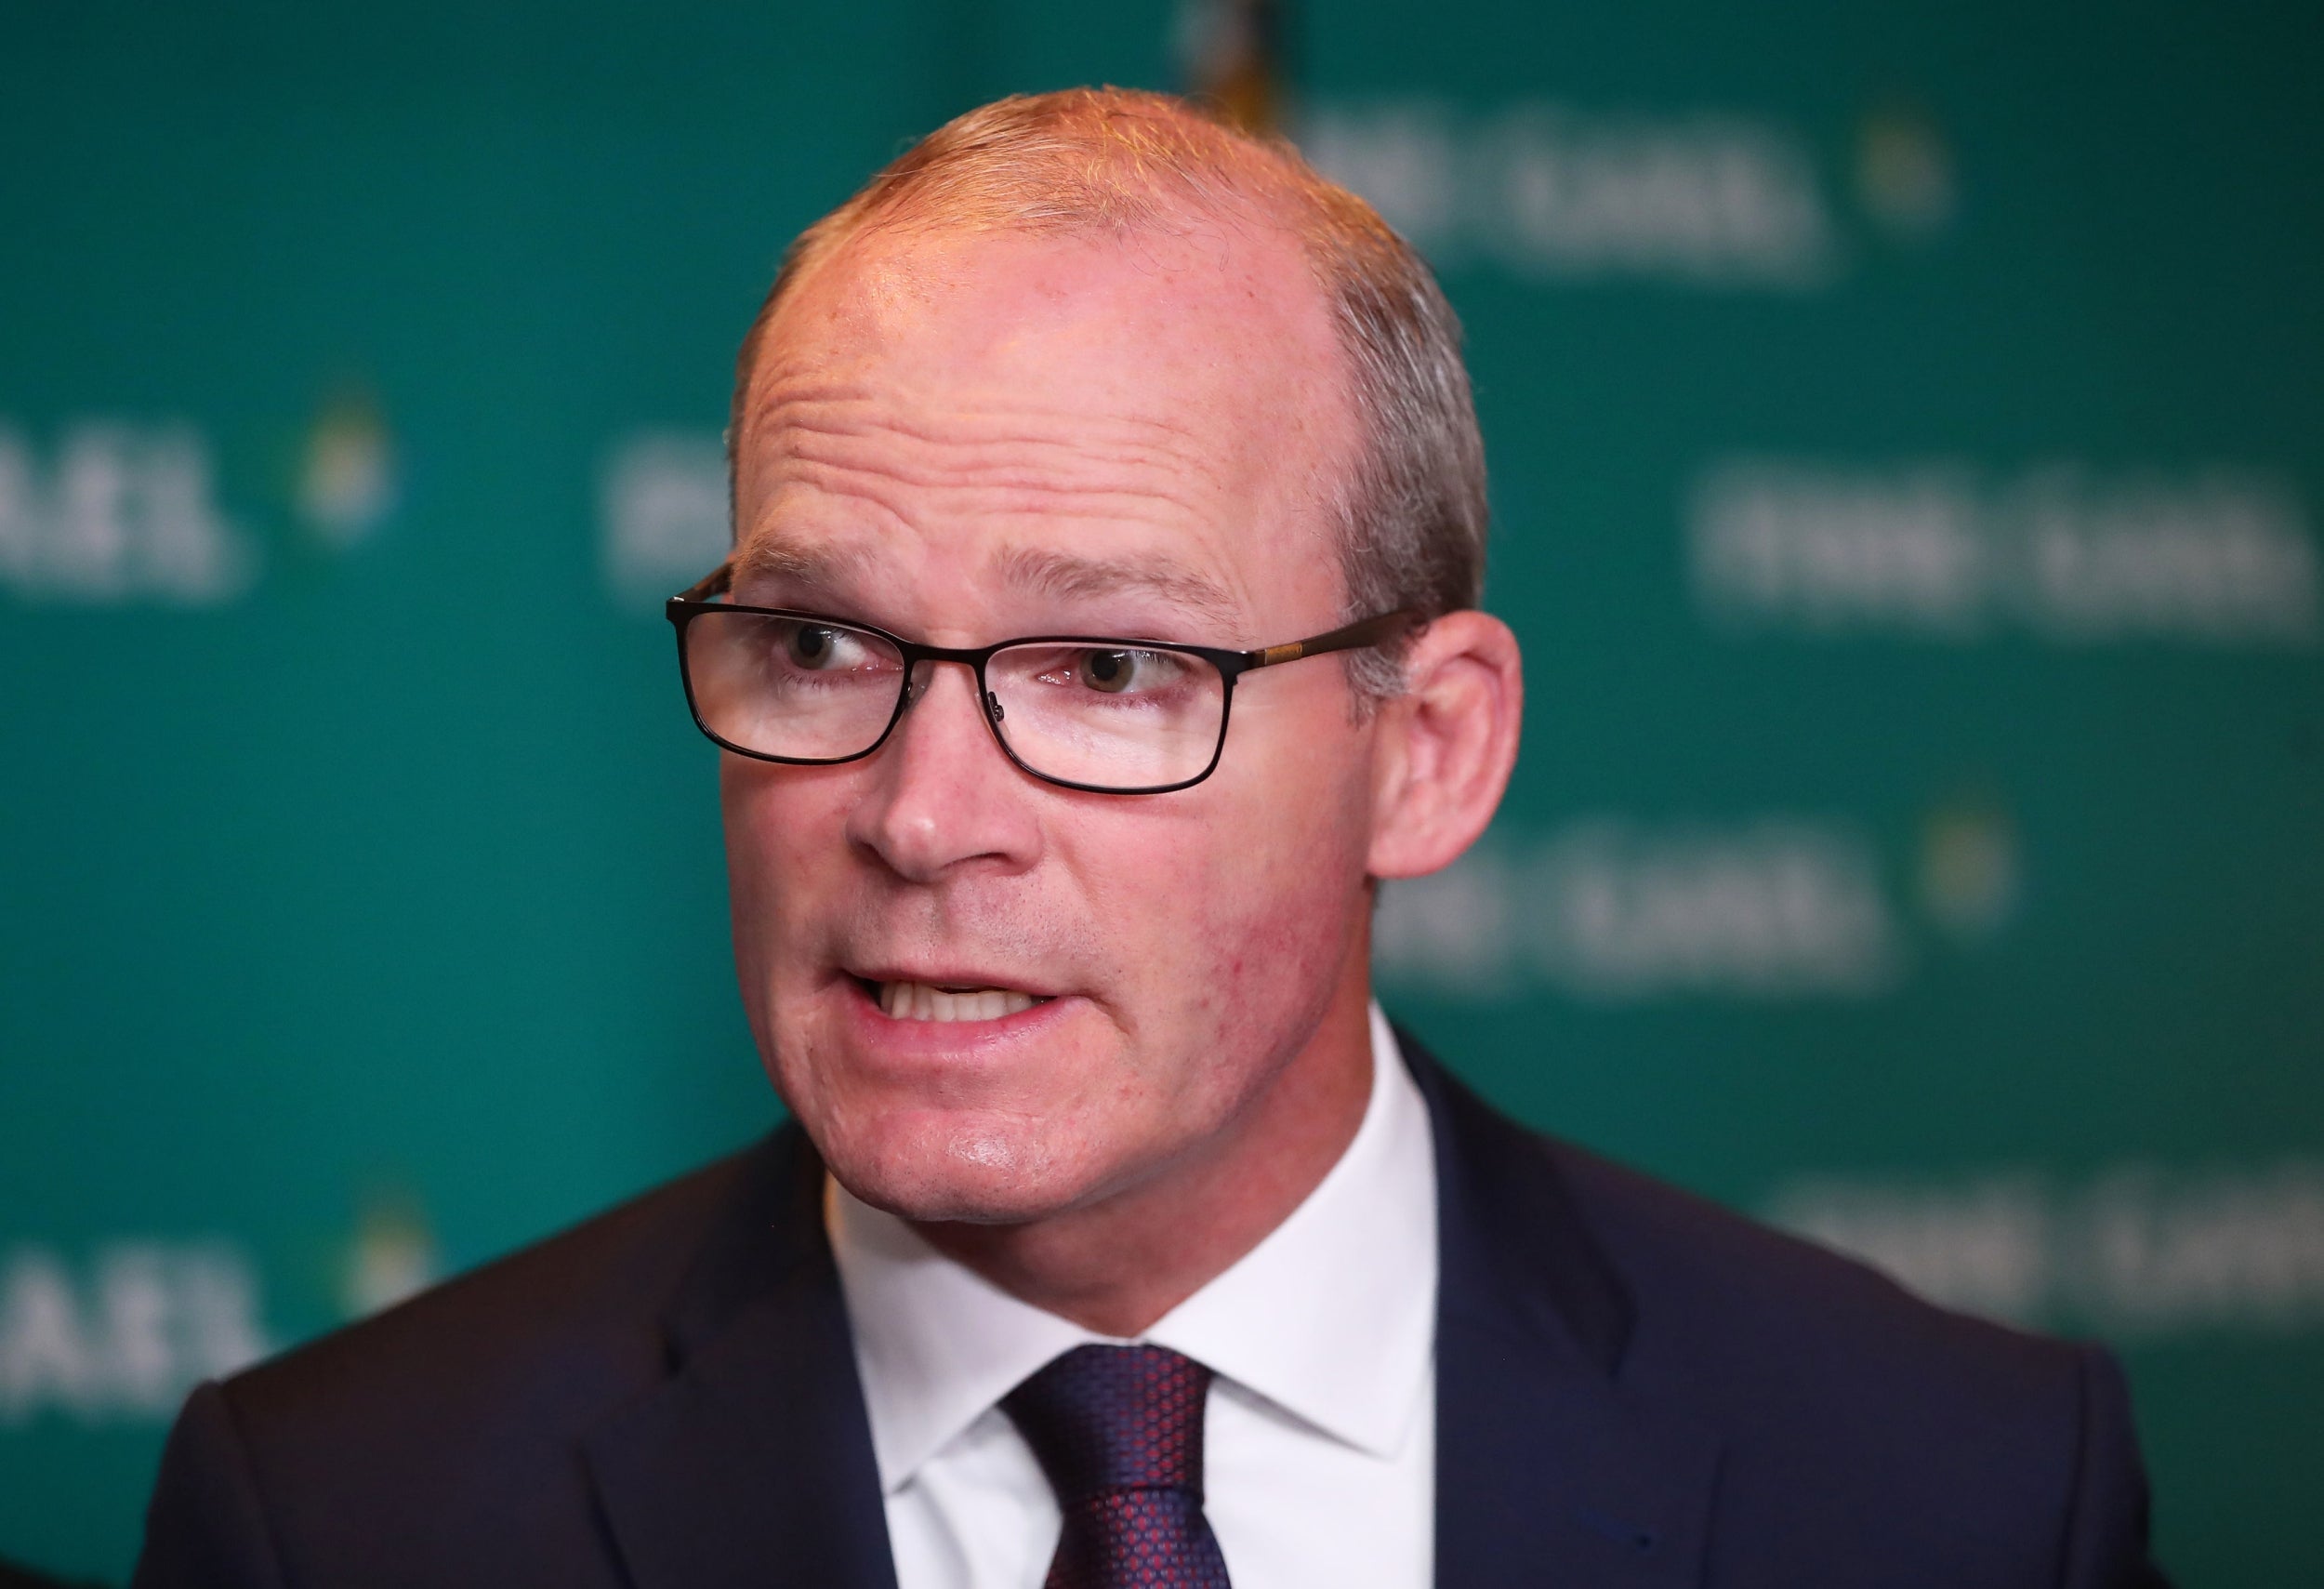 Simon Coveney said Ireland could not agree to the plans